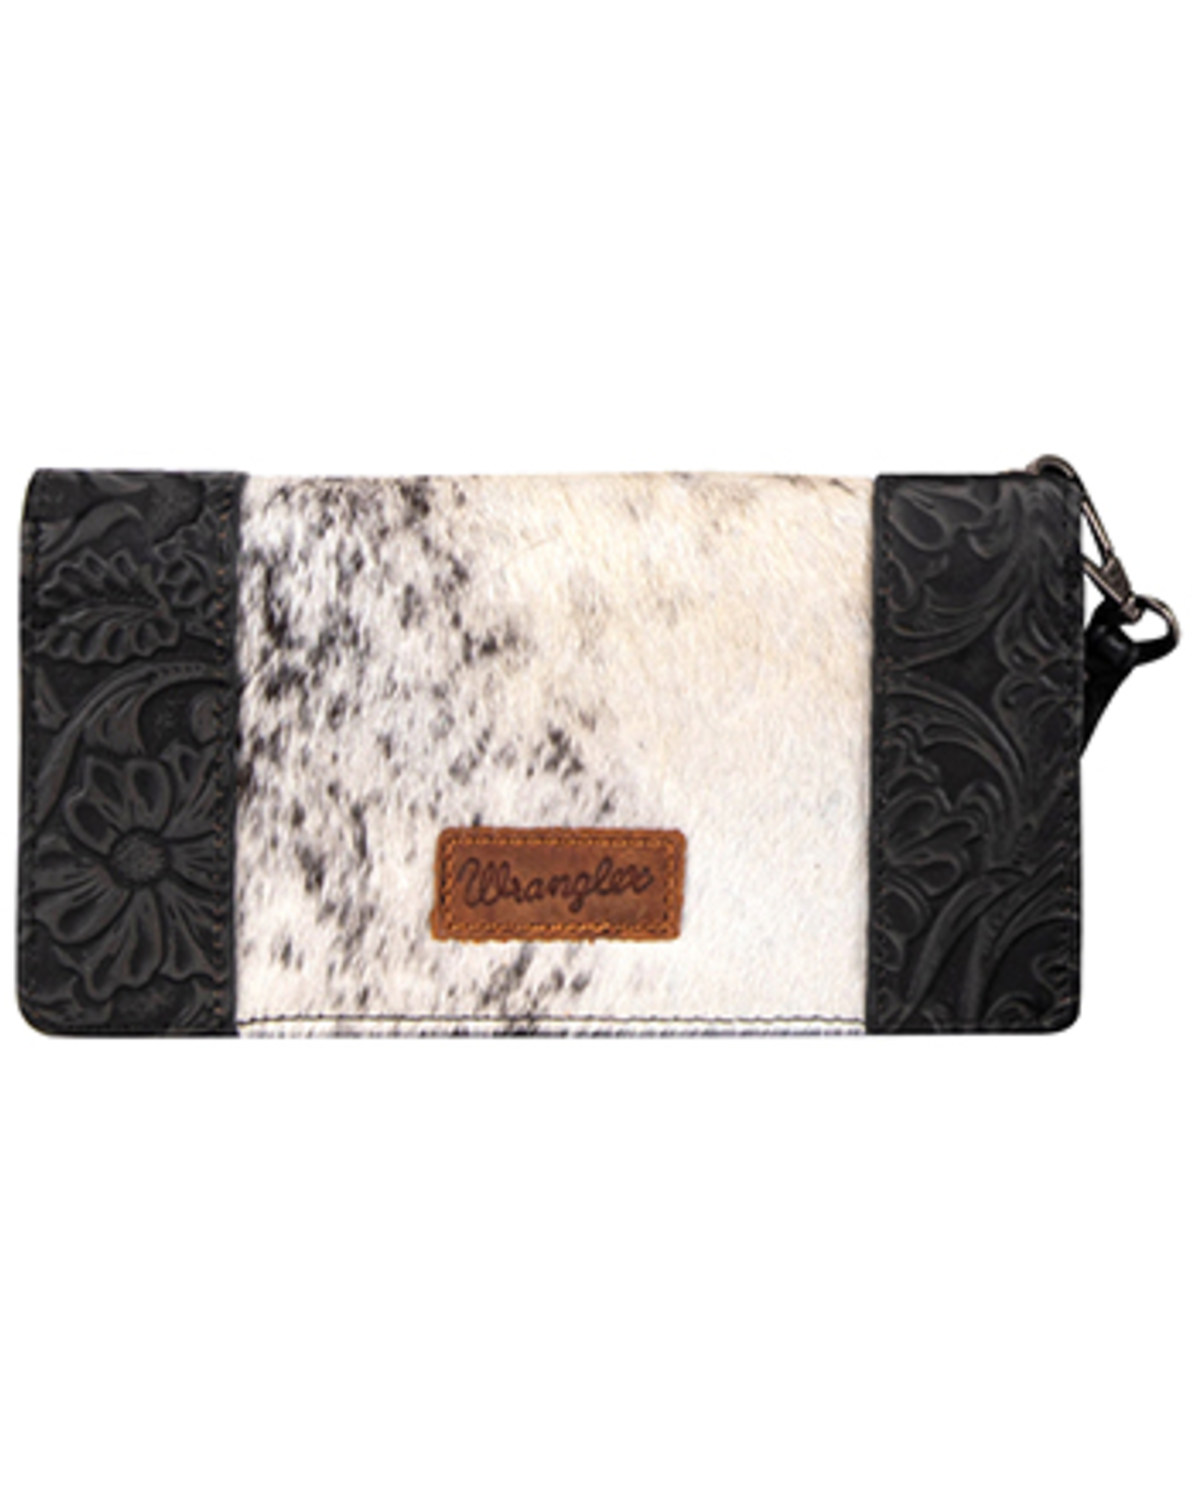 Wrangler Women's Tooled And Cowhide Leather Wallet